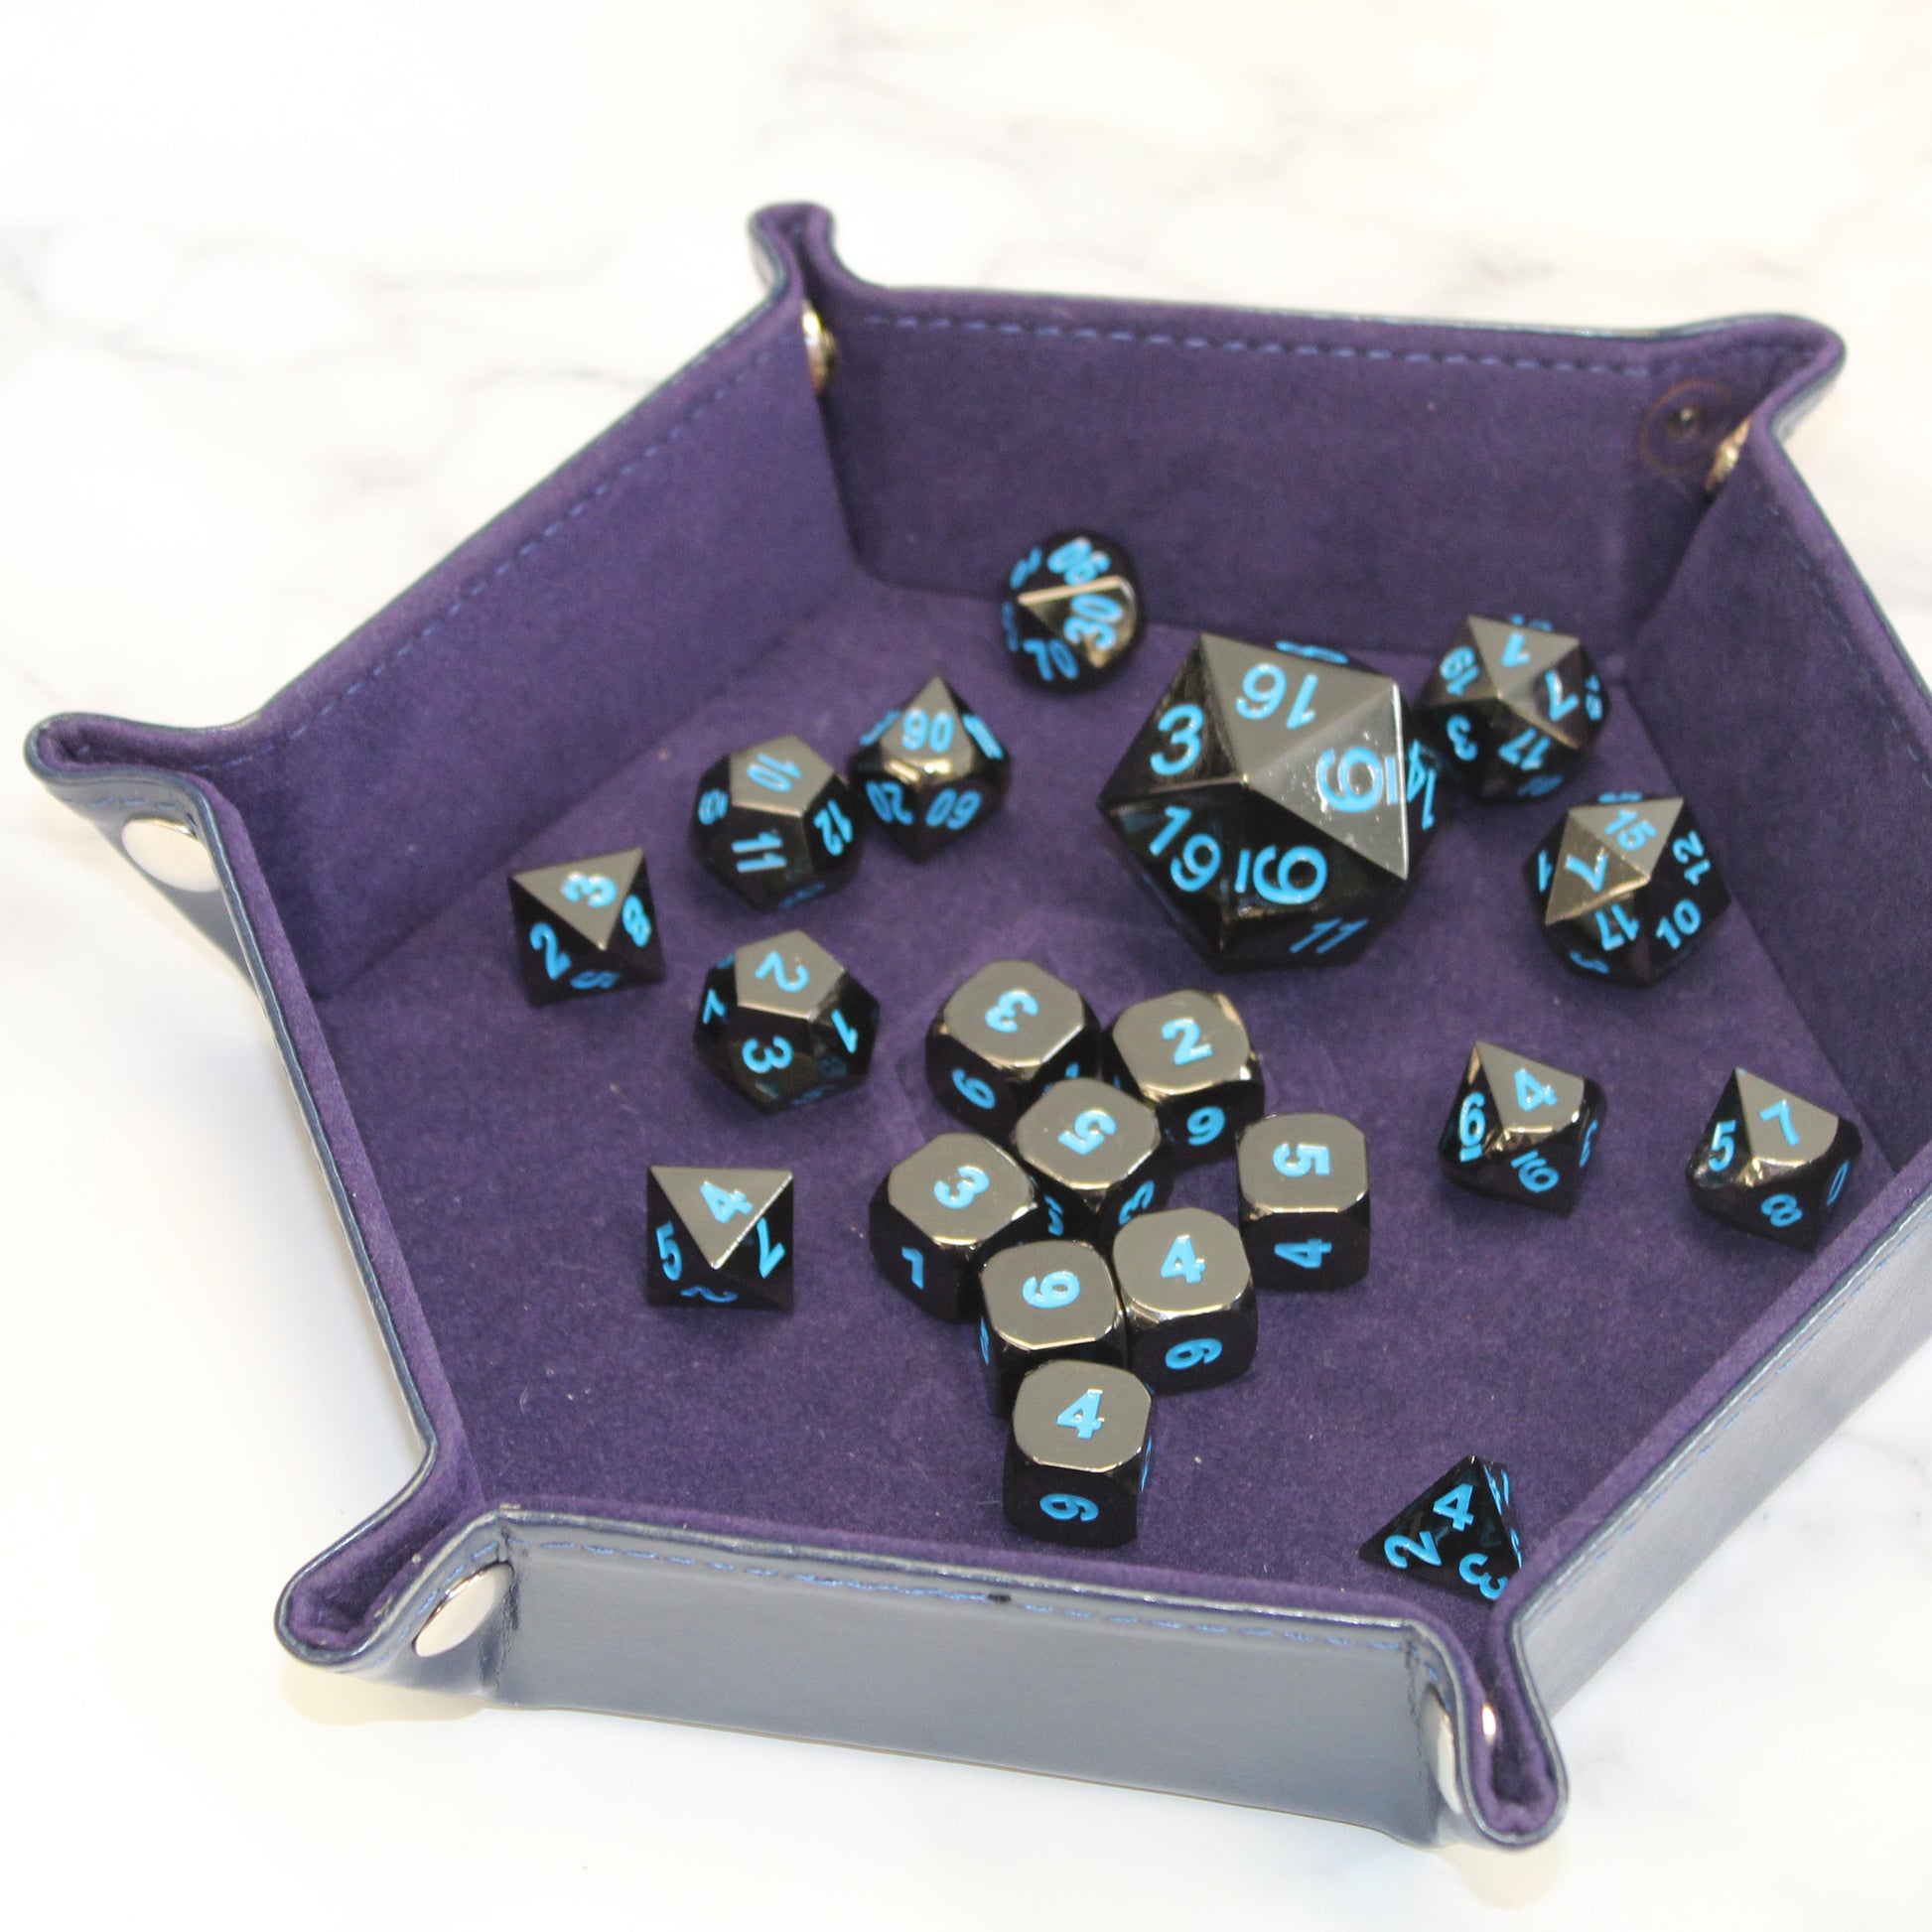 Dice Bundle with 21 dice for dungeons and dragons